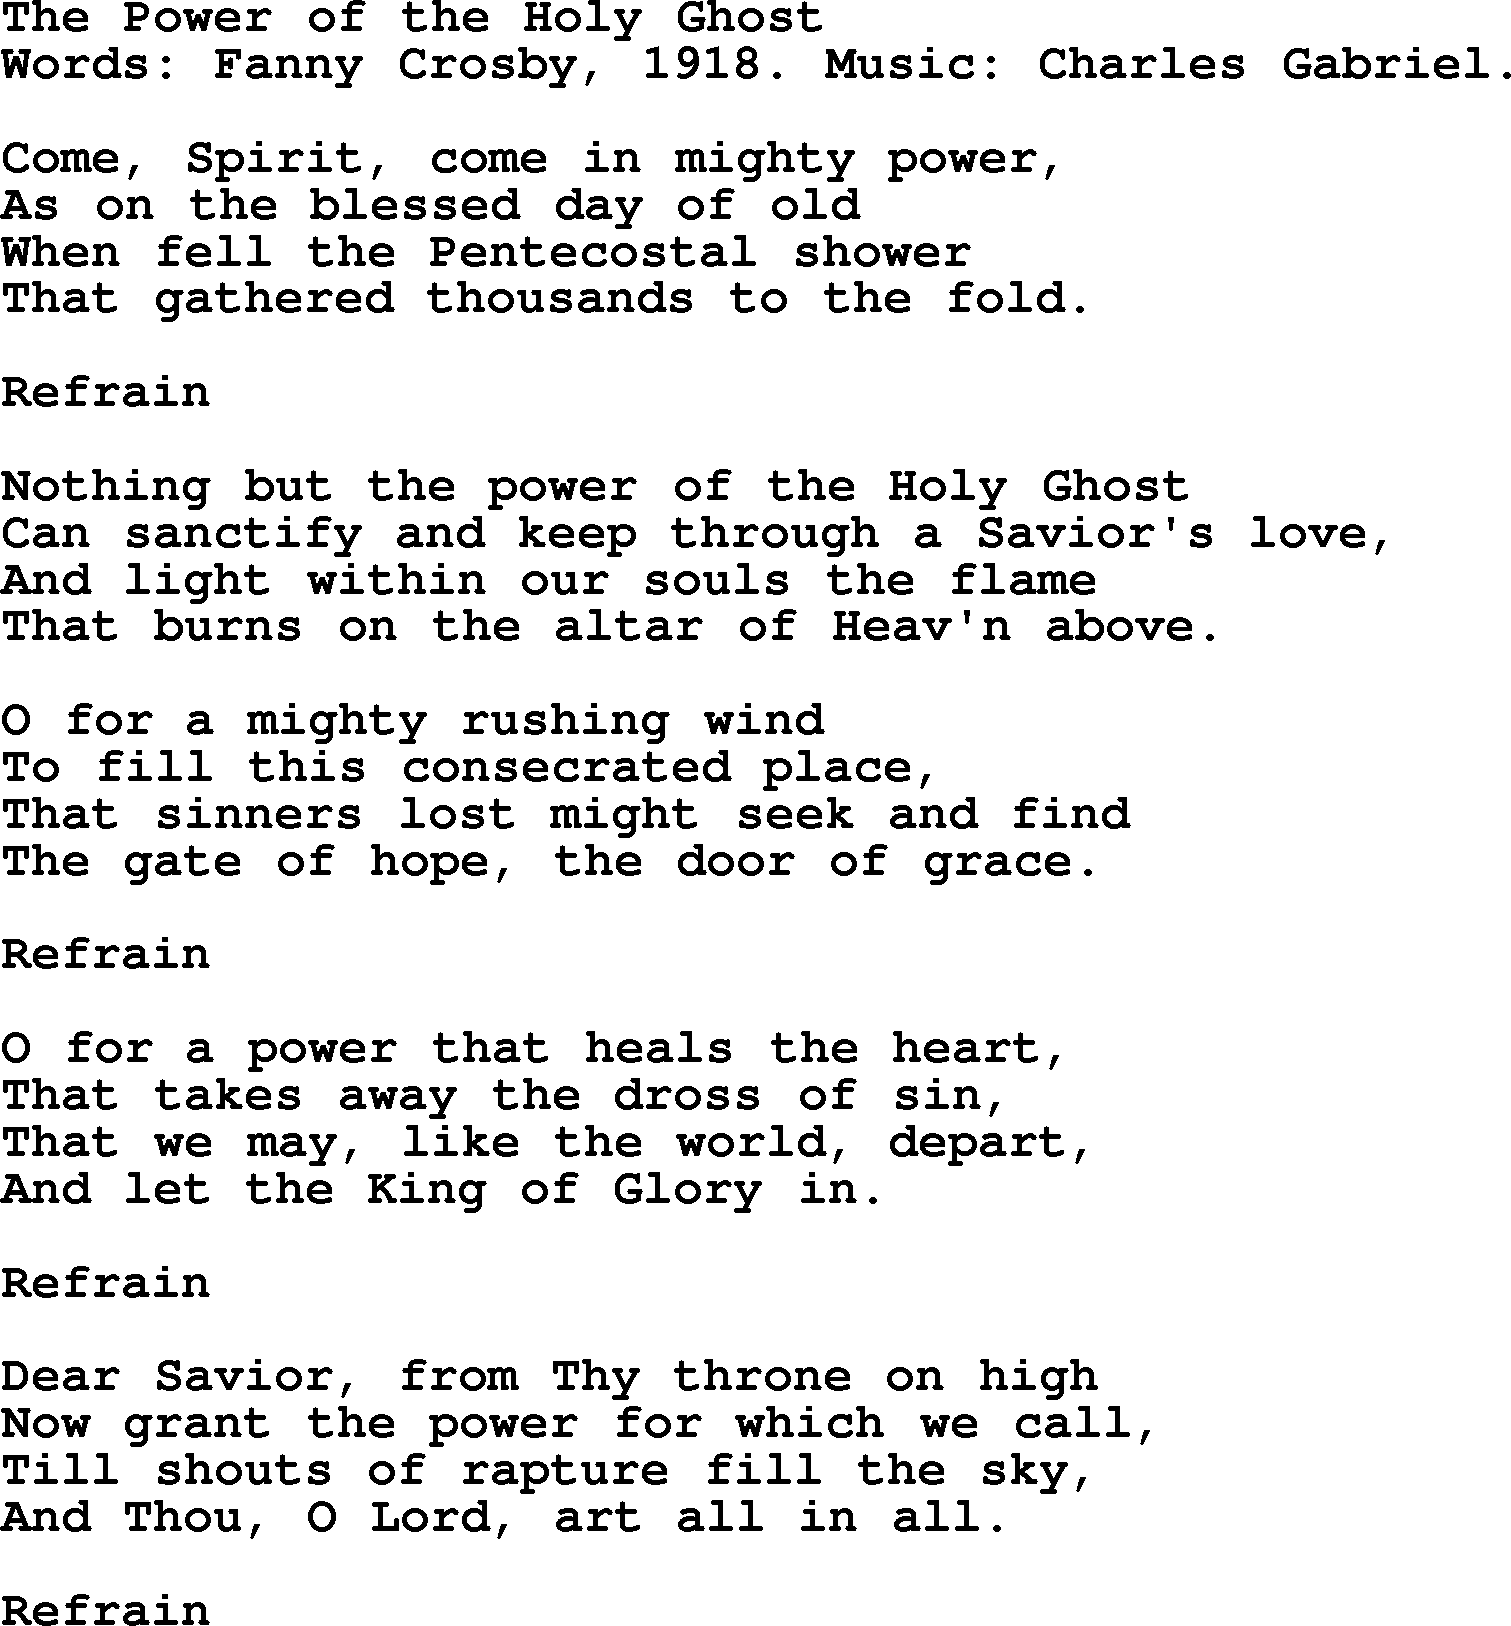 Fanny Crosby song: The Power Of The Holy Ghost, lyrics